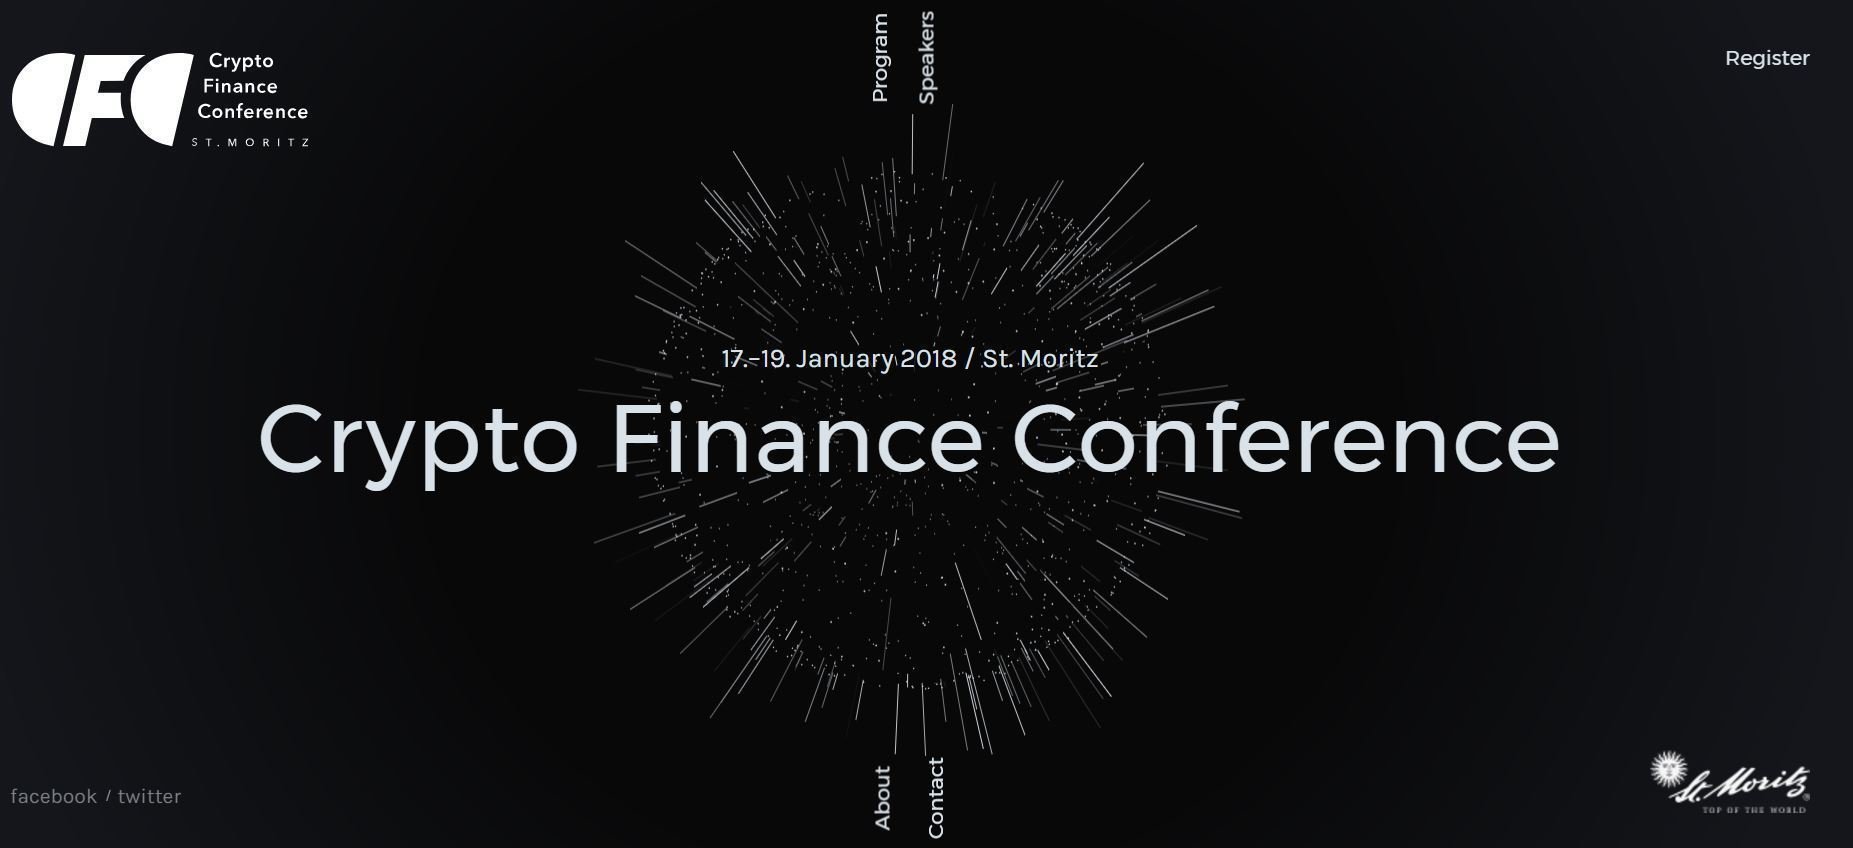 Crypto finance conference geneva what`s the best betting site